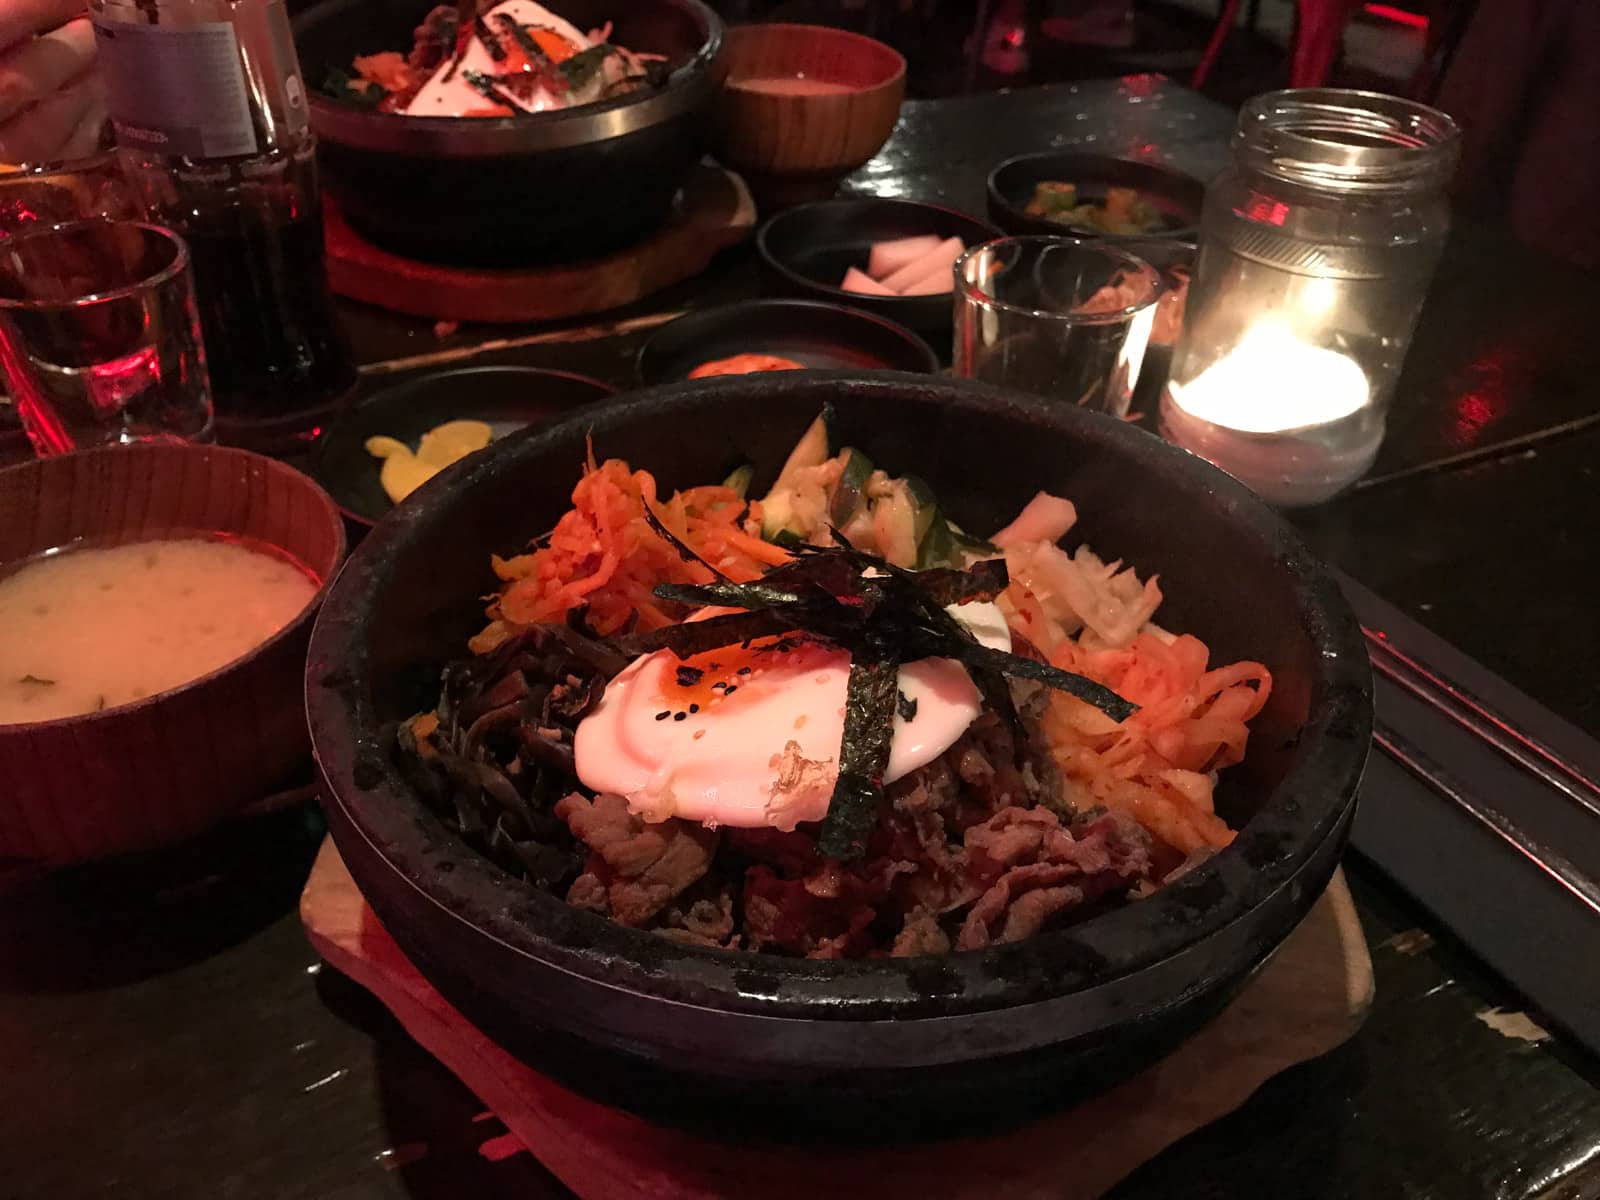 A hot stone pot on a wooden plate, in a restaurant. There is also some soup and drinks placed on the table